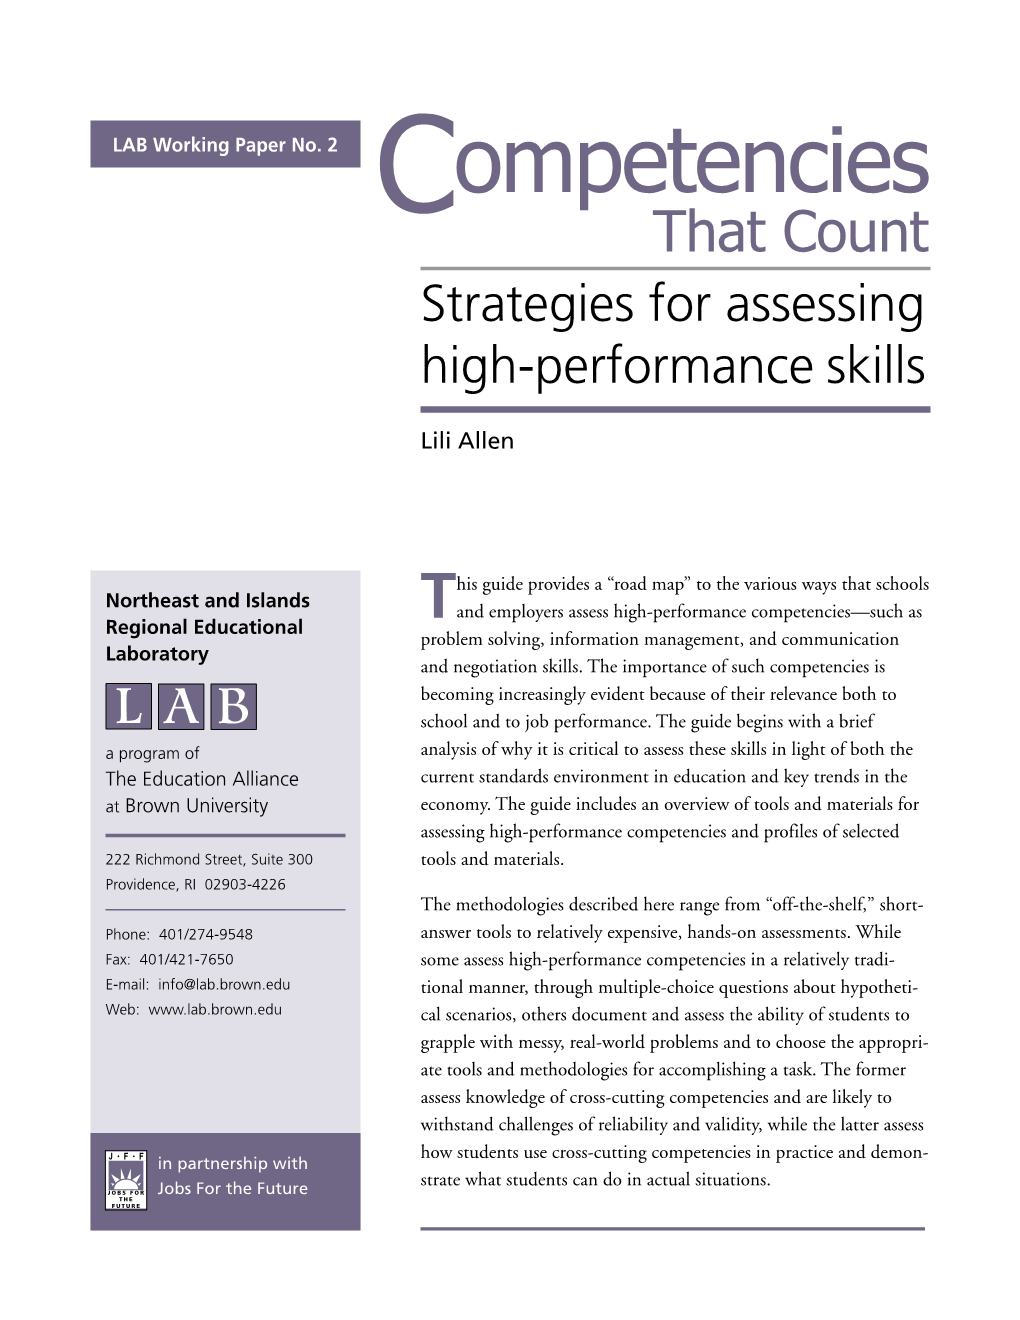 Competencies That Count: Strategies for Assessing High-Performance Skills